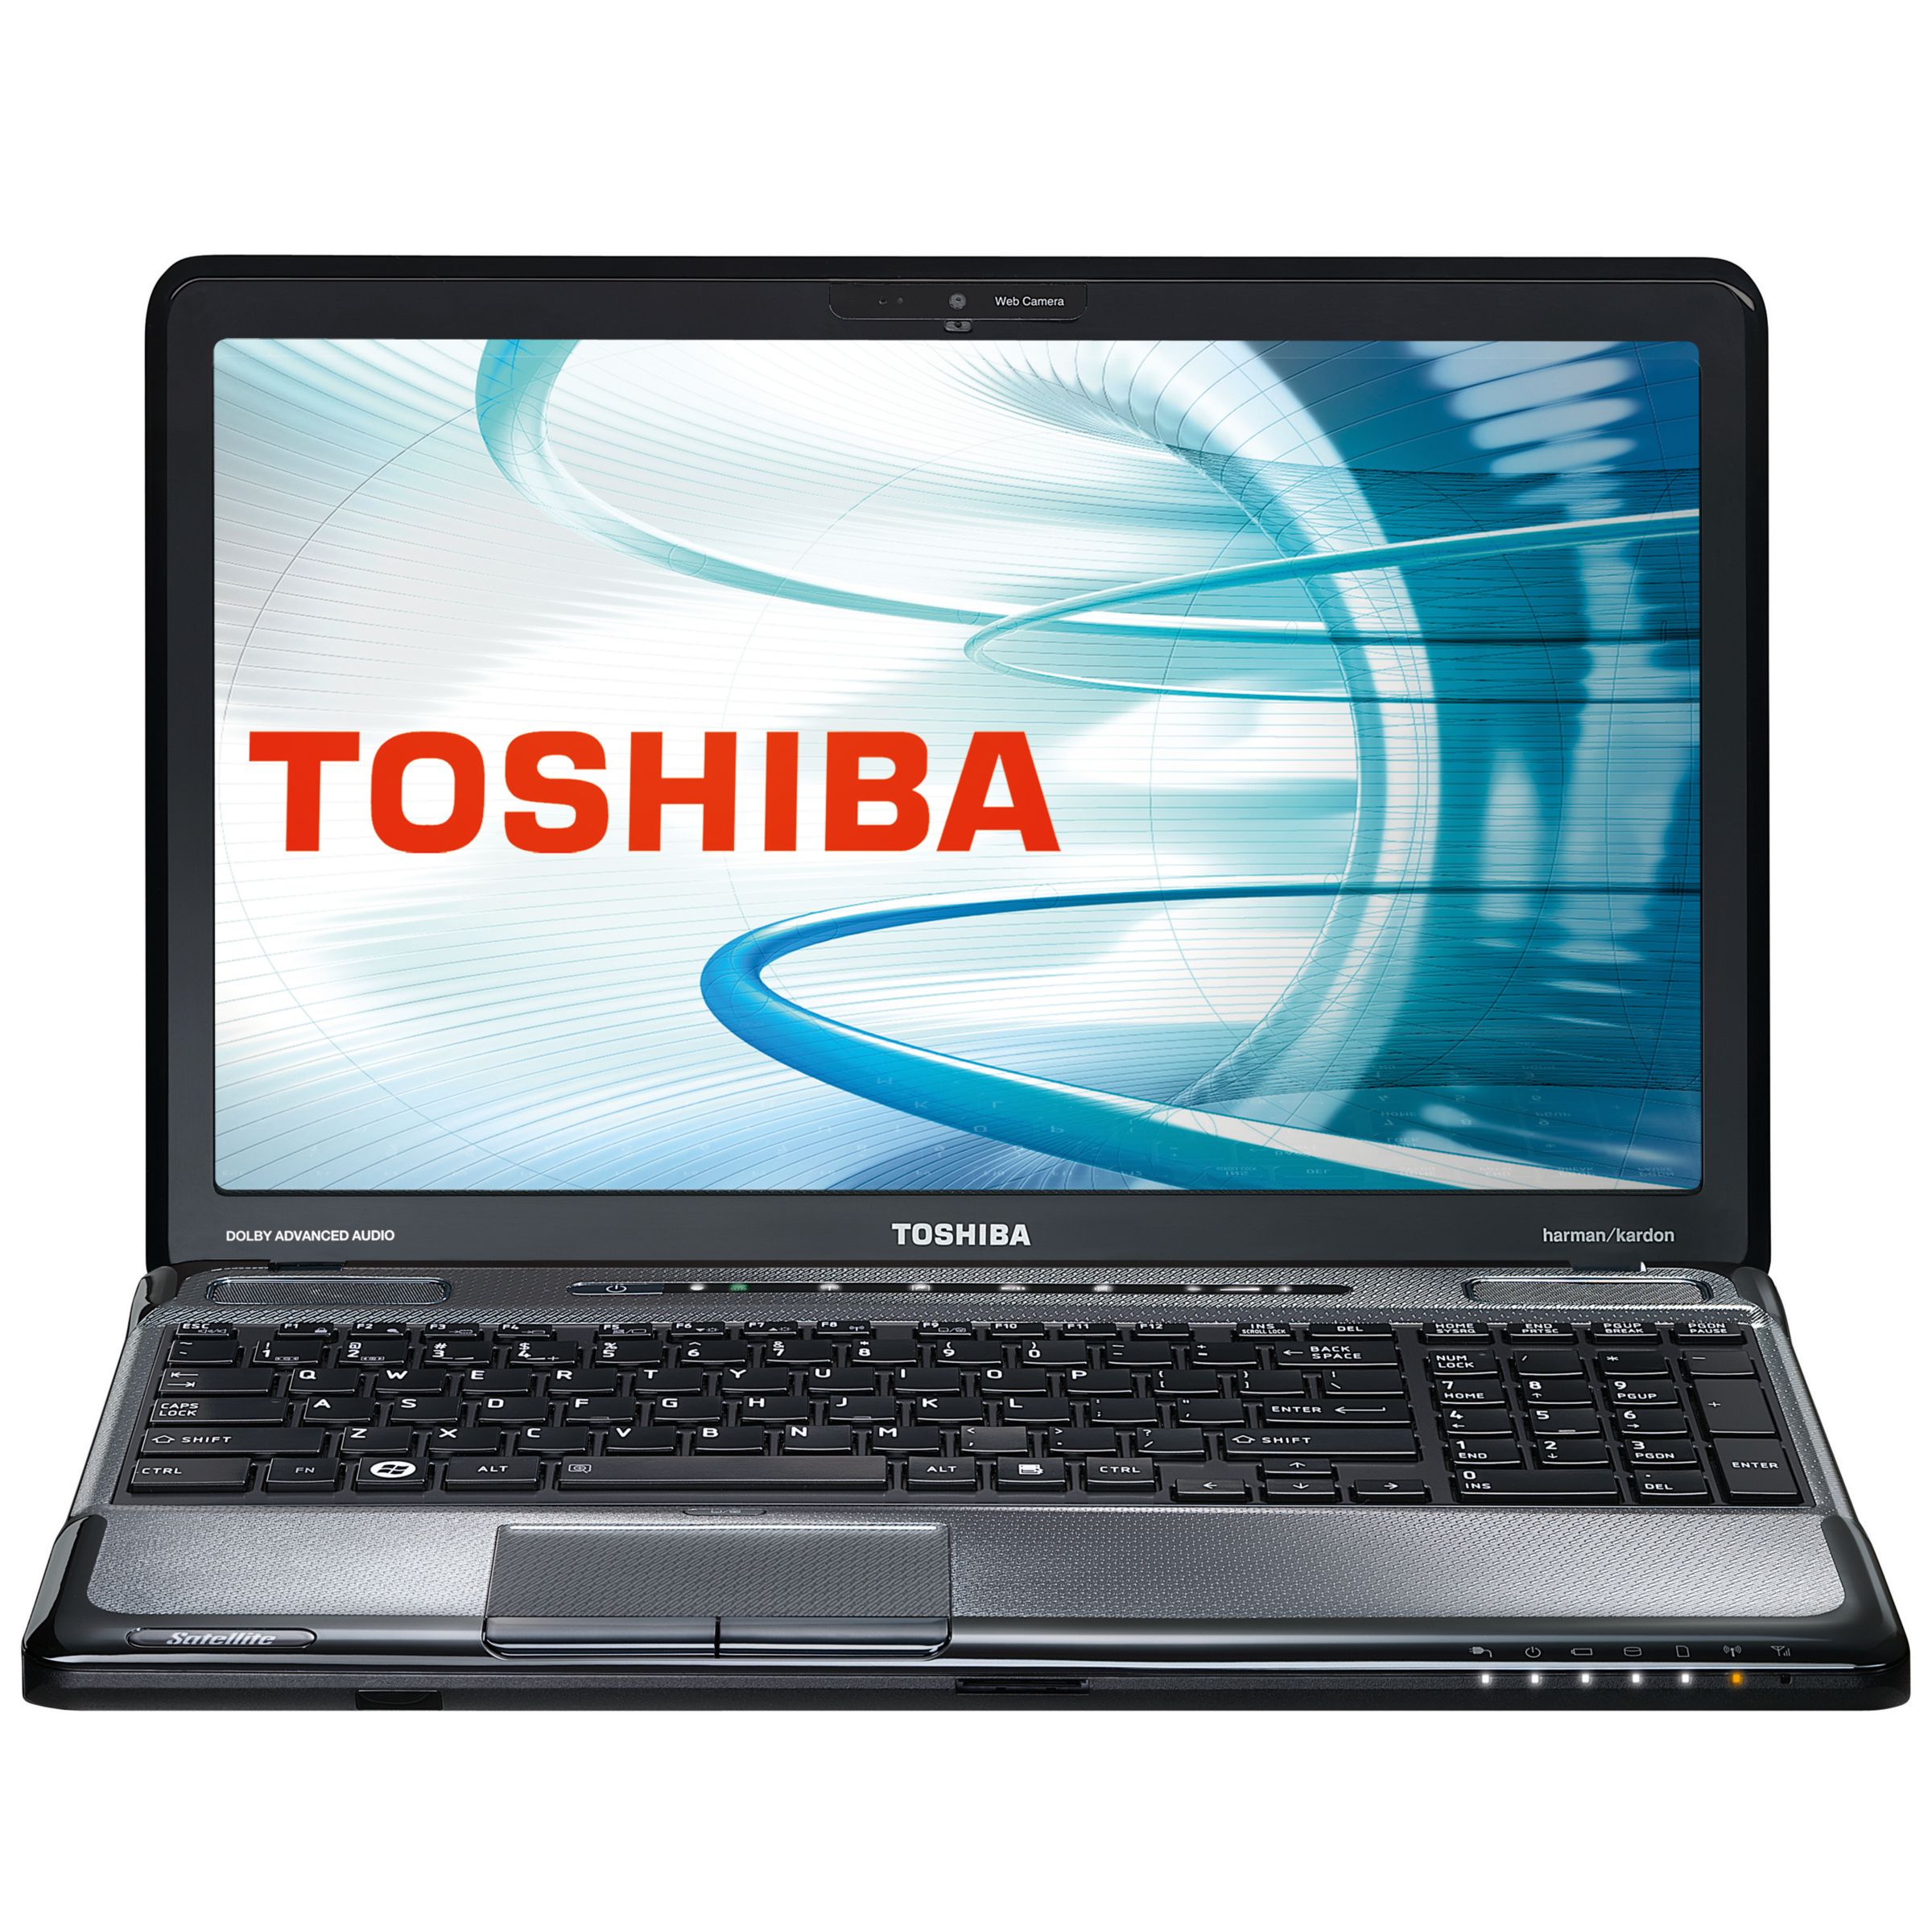 Toshiba Satellite A665-14Q 3D Laptop, Intel Core i5, 500GB, 2.66GHz, 4GB RAM with 15.6 Inch Display at John Lewis